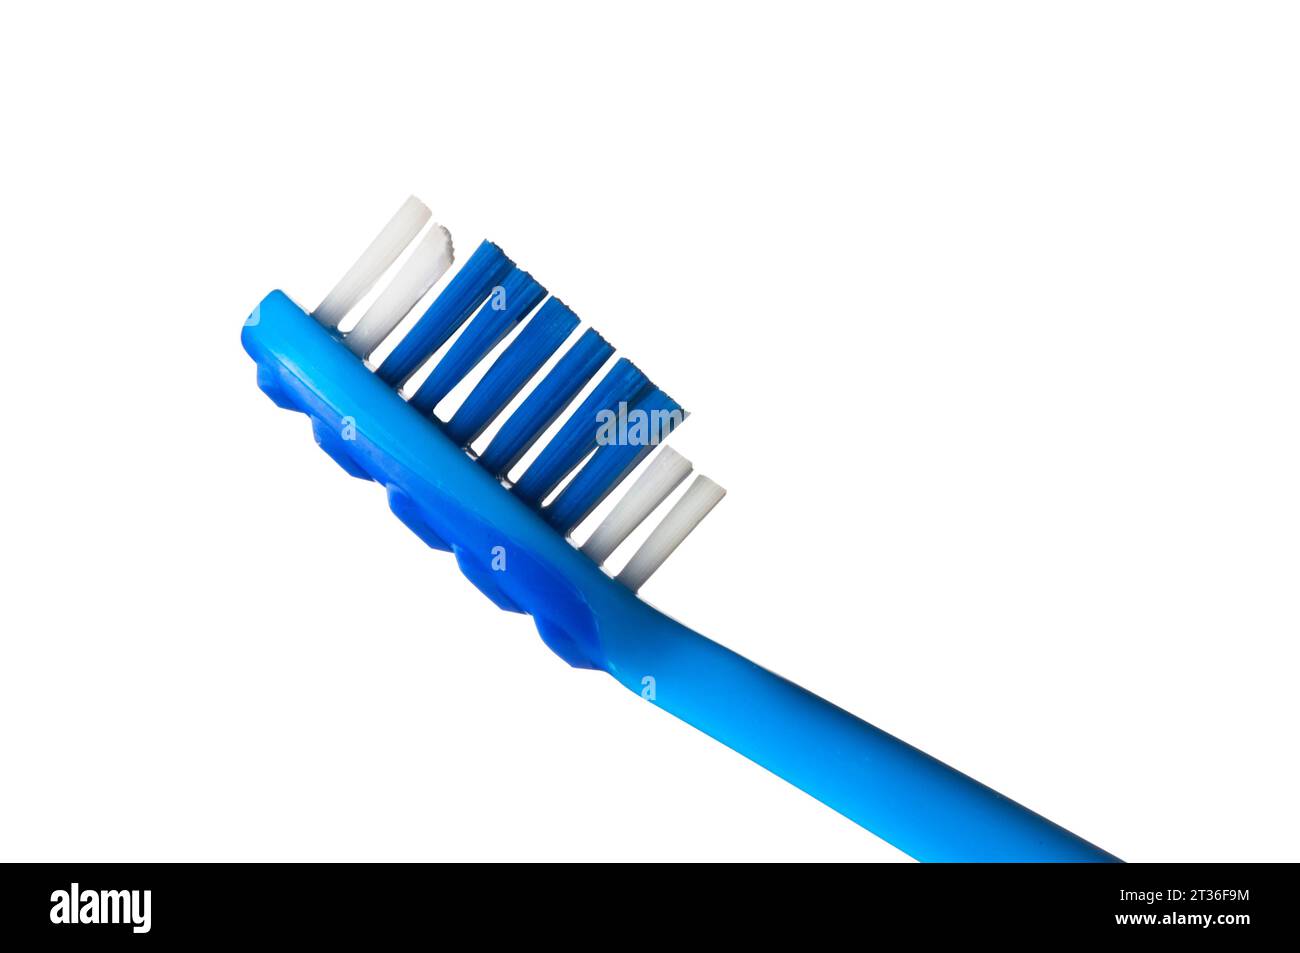 Studio shot of a blue plastic toothbrush head cut out against a white background - John Gollop Stock Photo